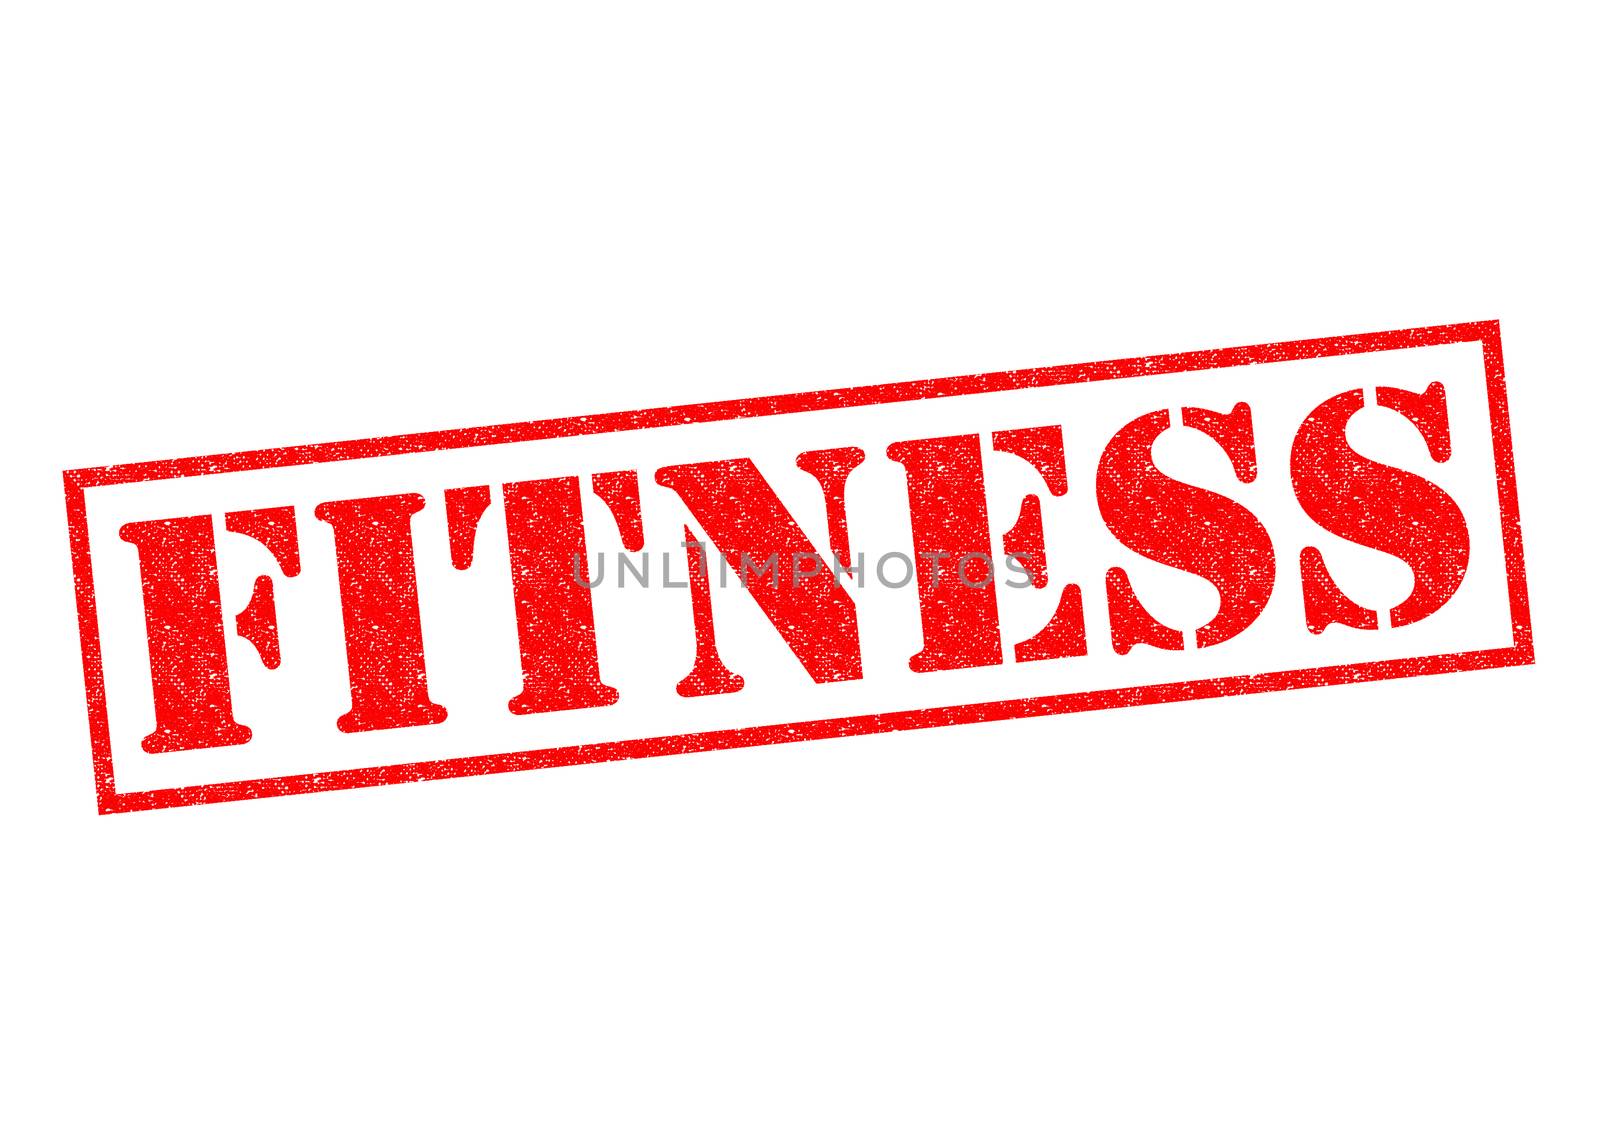 FITNESS red Rubber Stamp over a white background.